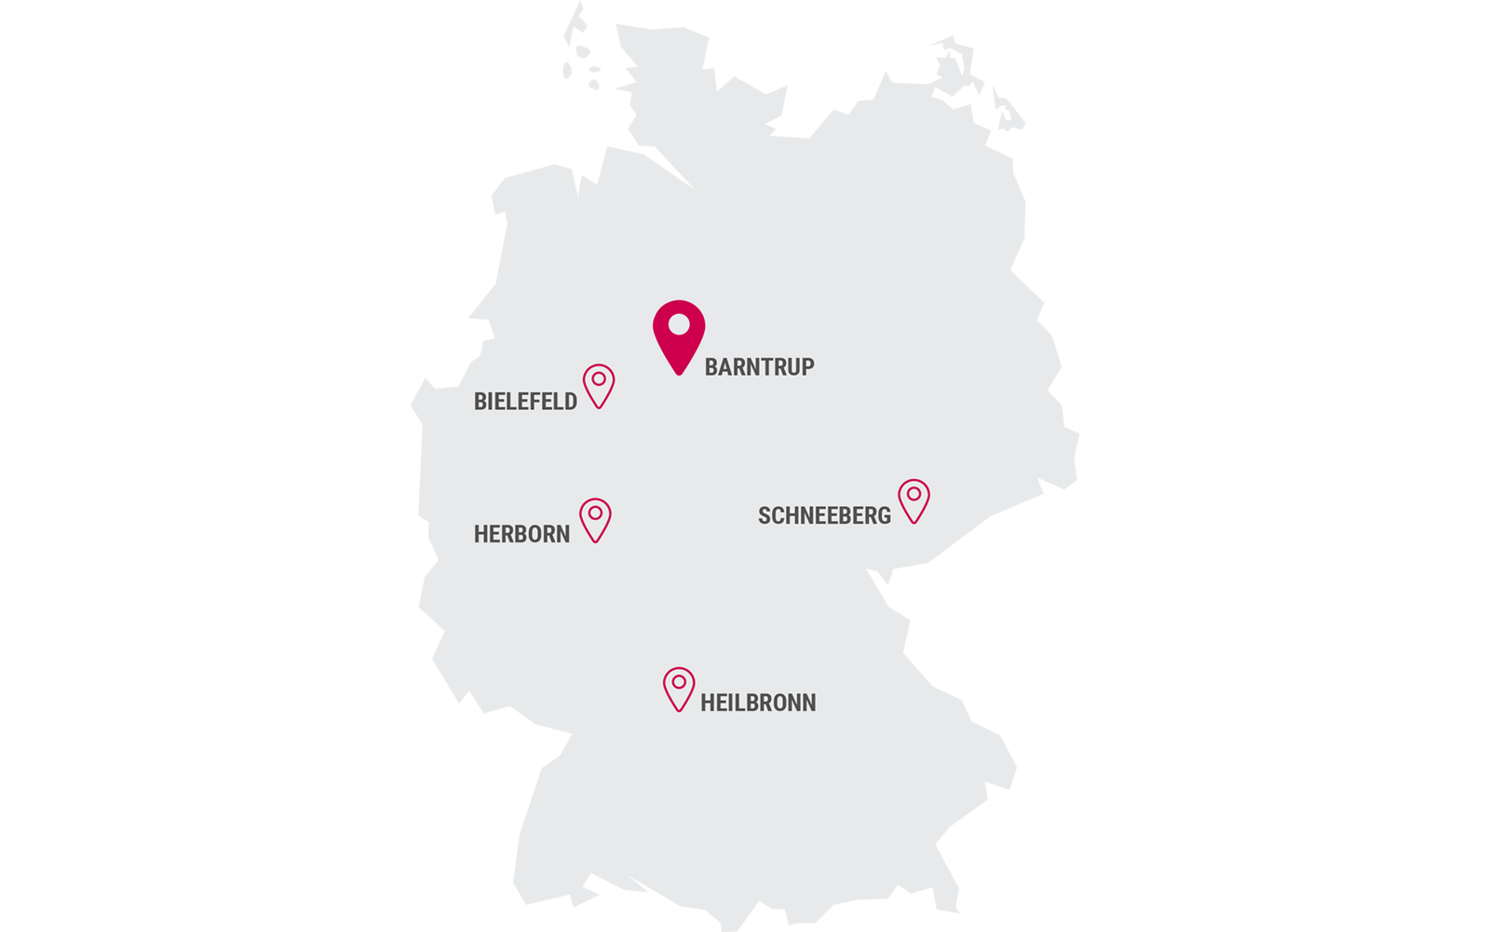 Map of Germany with KEB locations